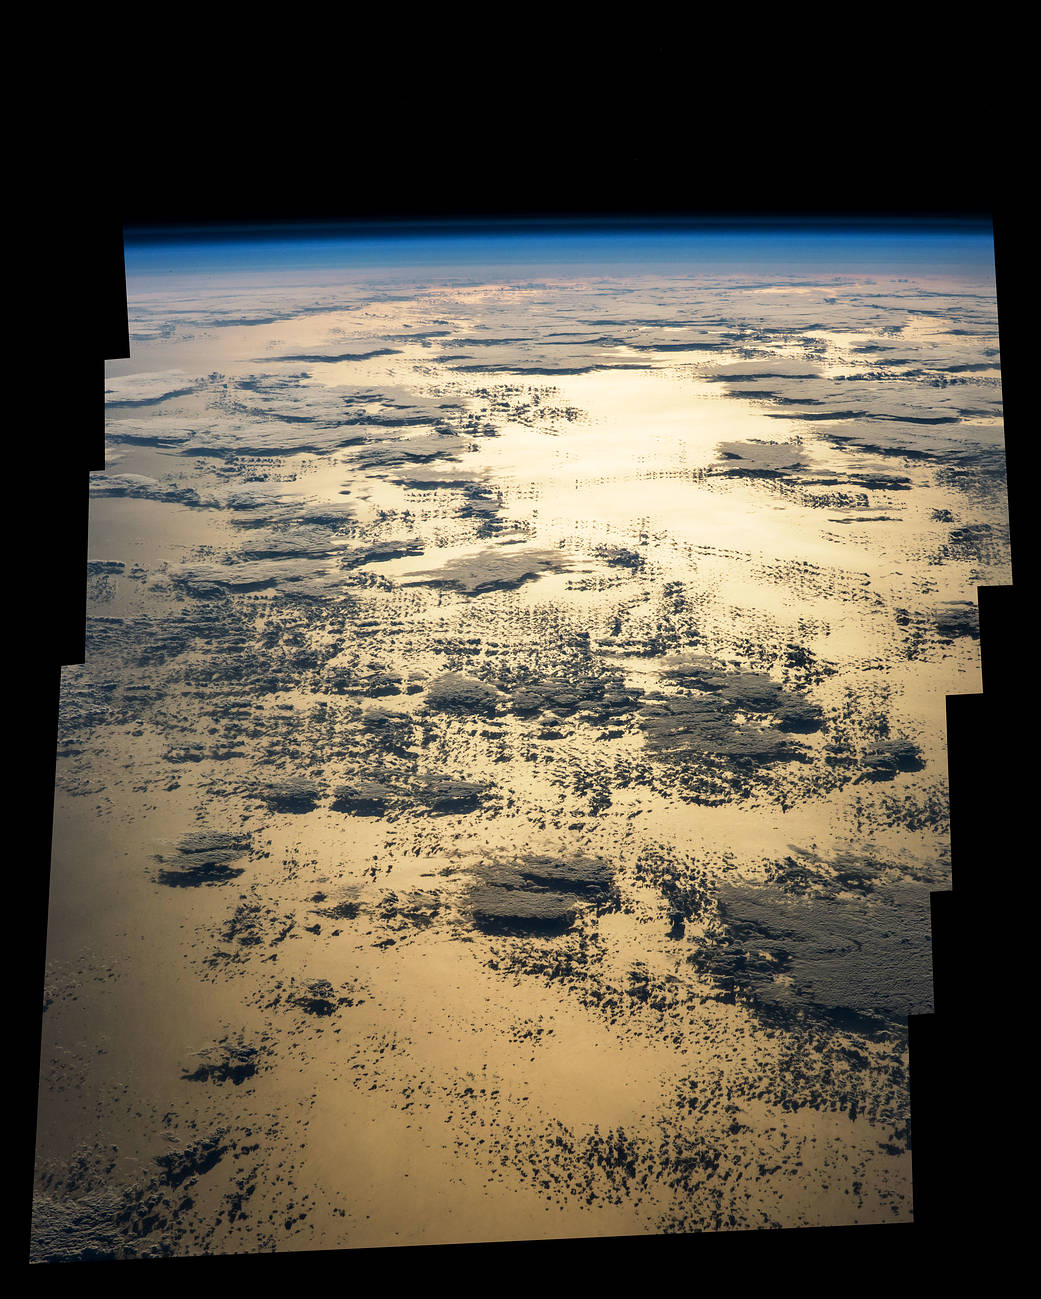 Sunglint and clouds over the ocean photographed from low Earth orbit